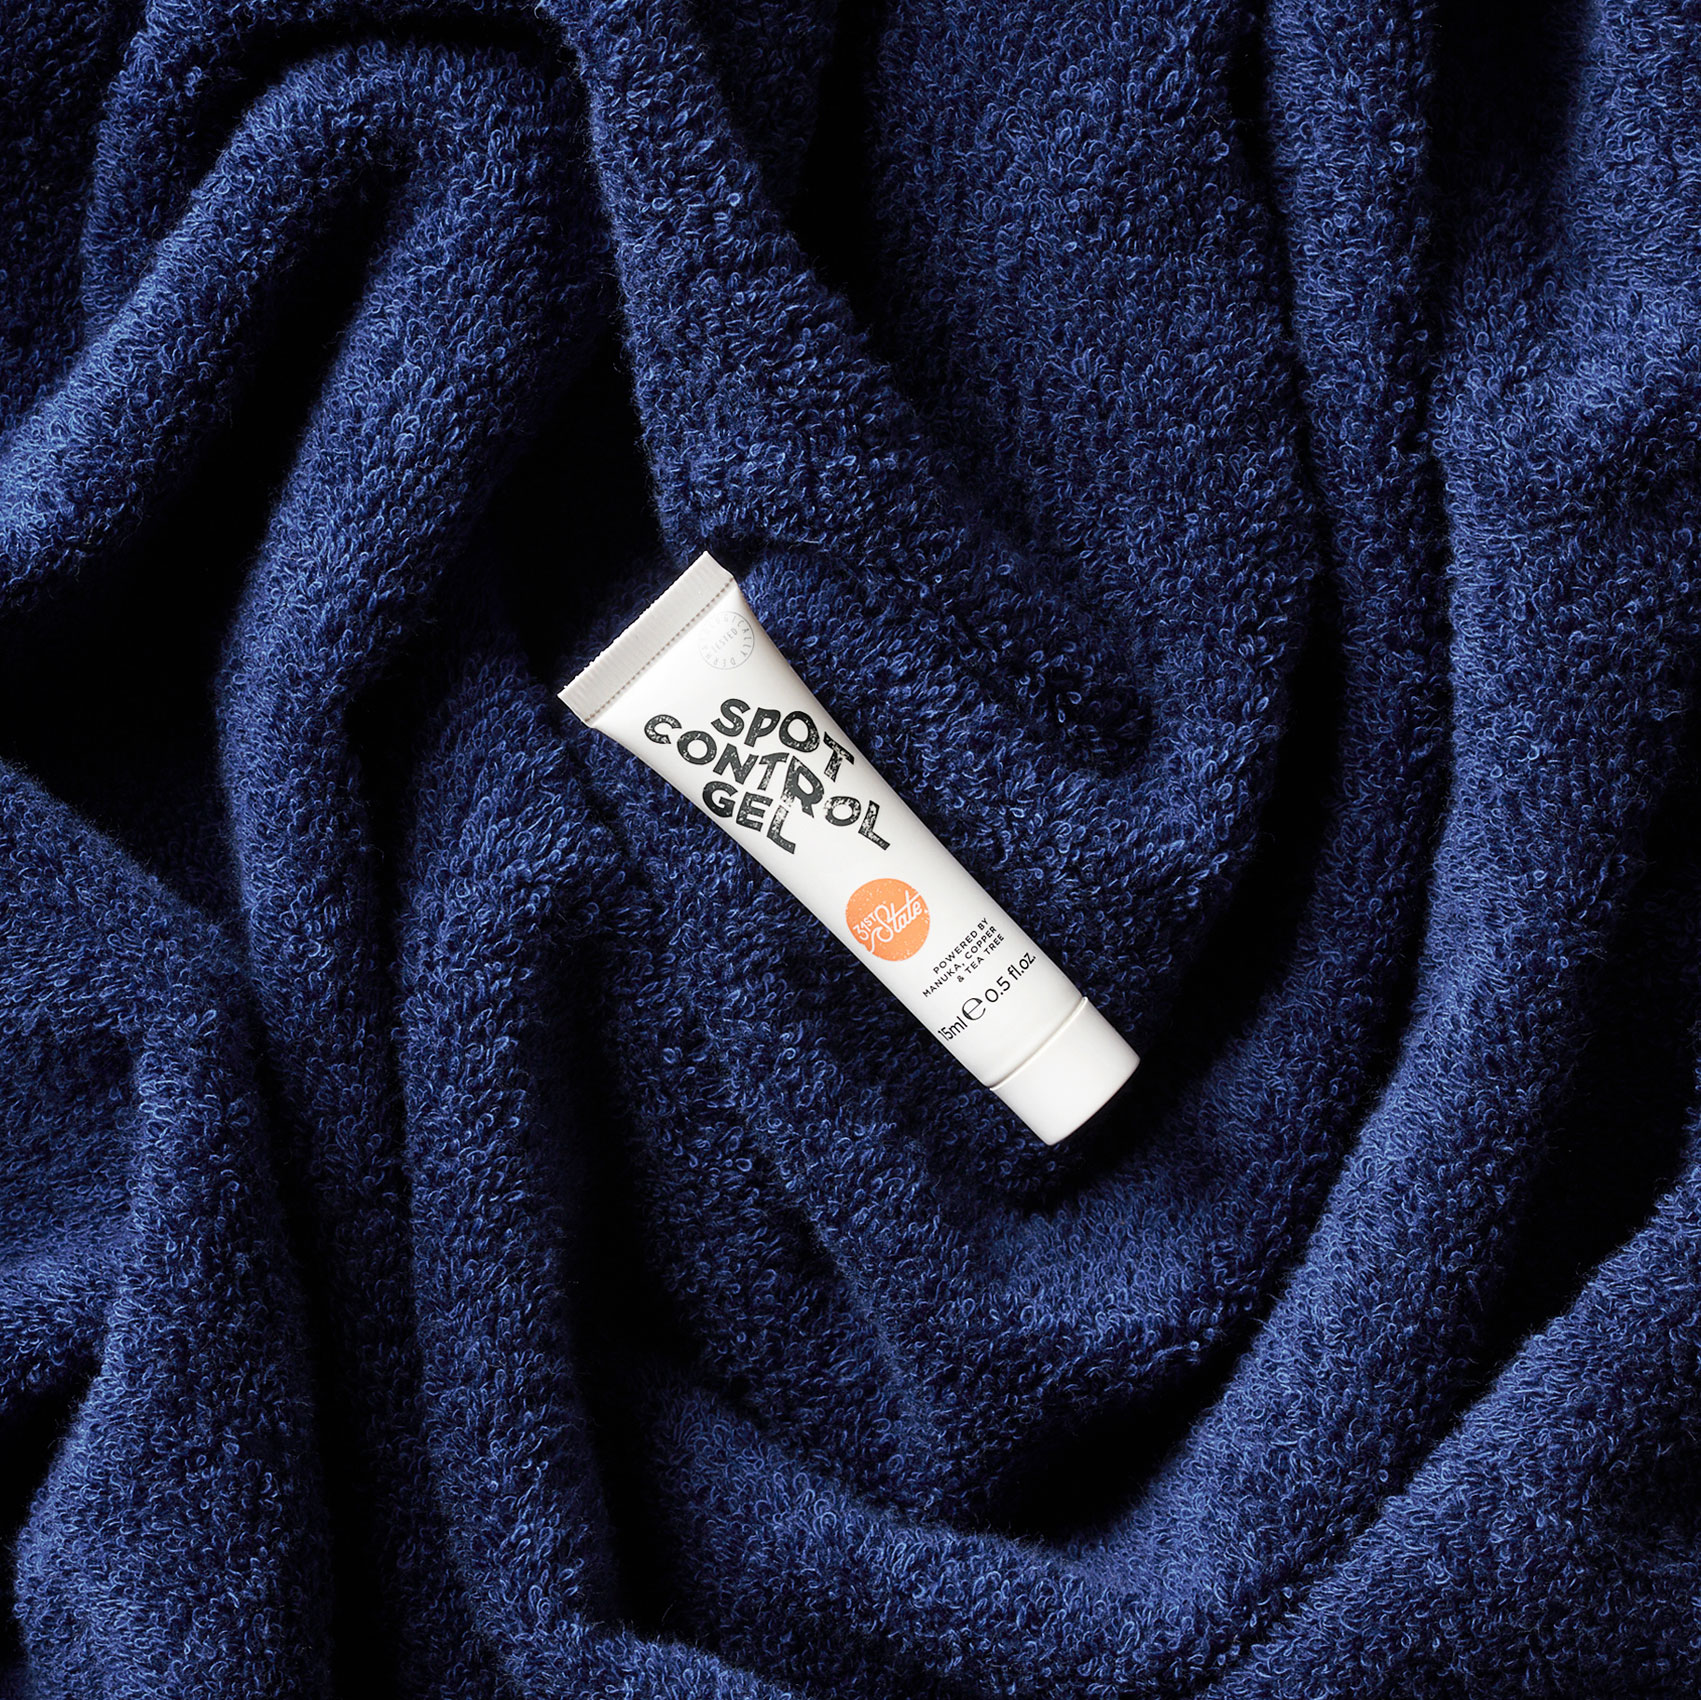 Skin care product nestled in blue towel